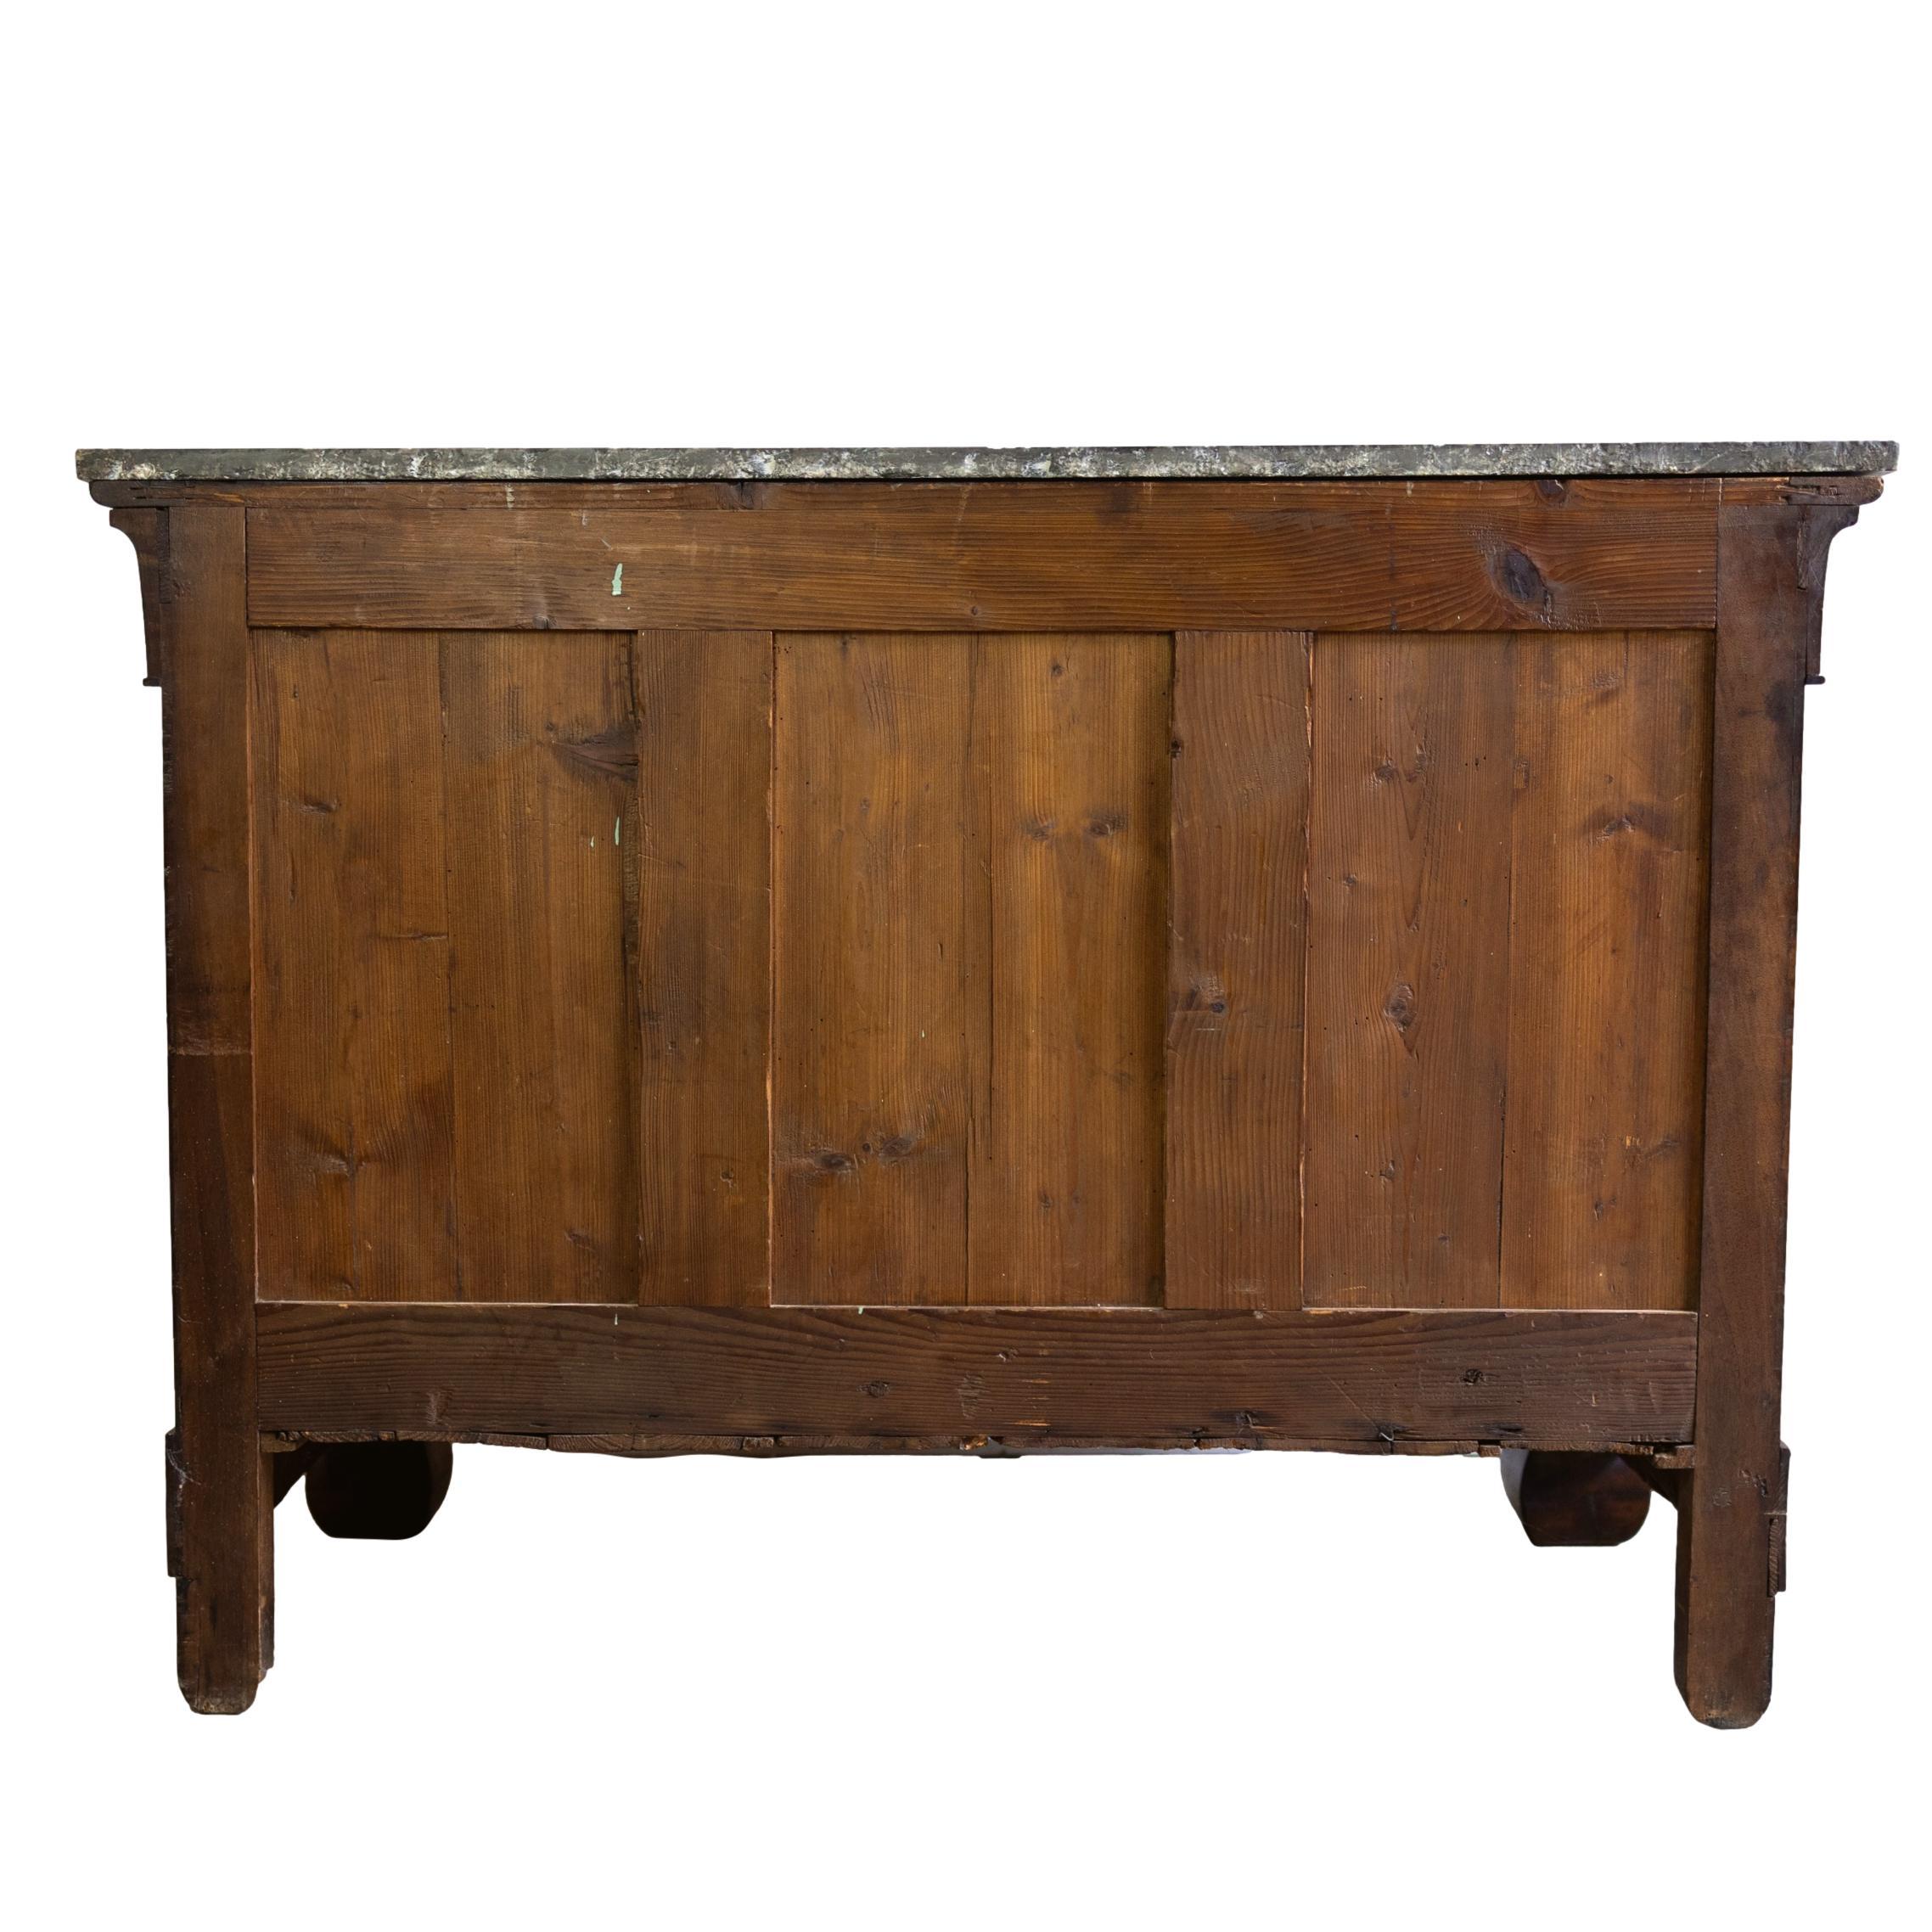 An Empire Ormolu-Mounted Mahogany Commode, Marble Top, French, ca. 1820 For Sale 1